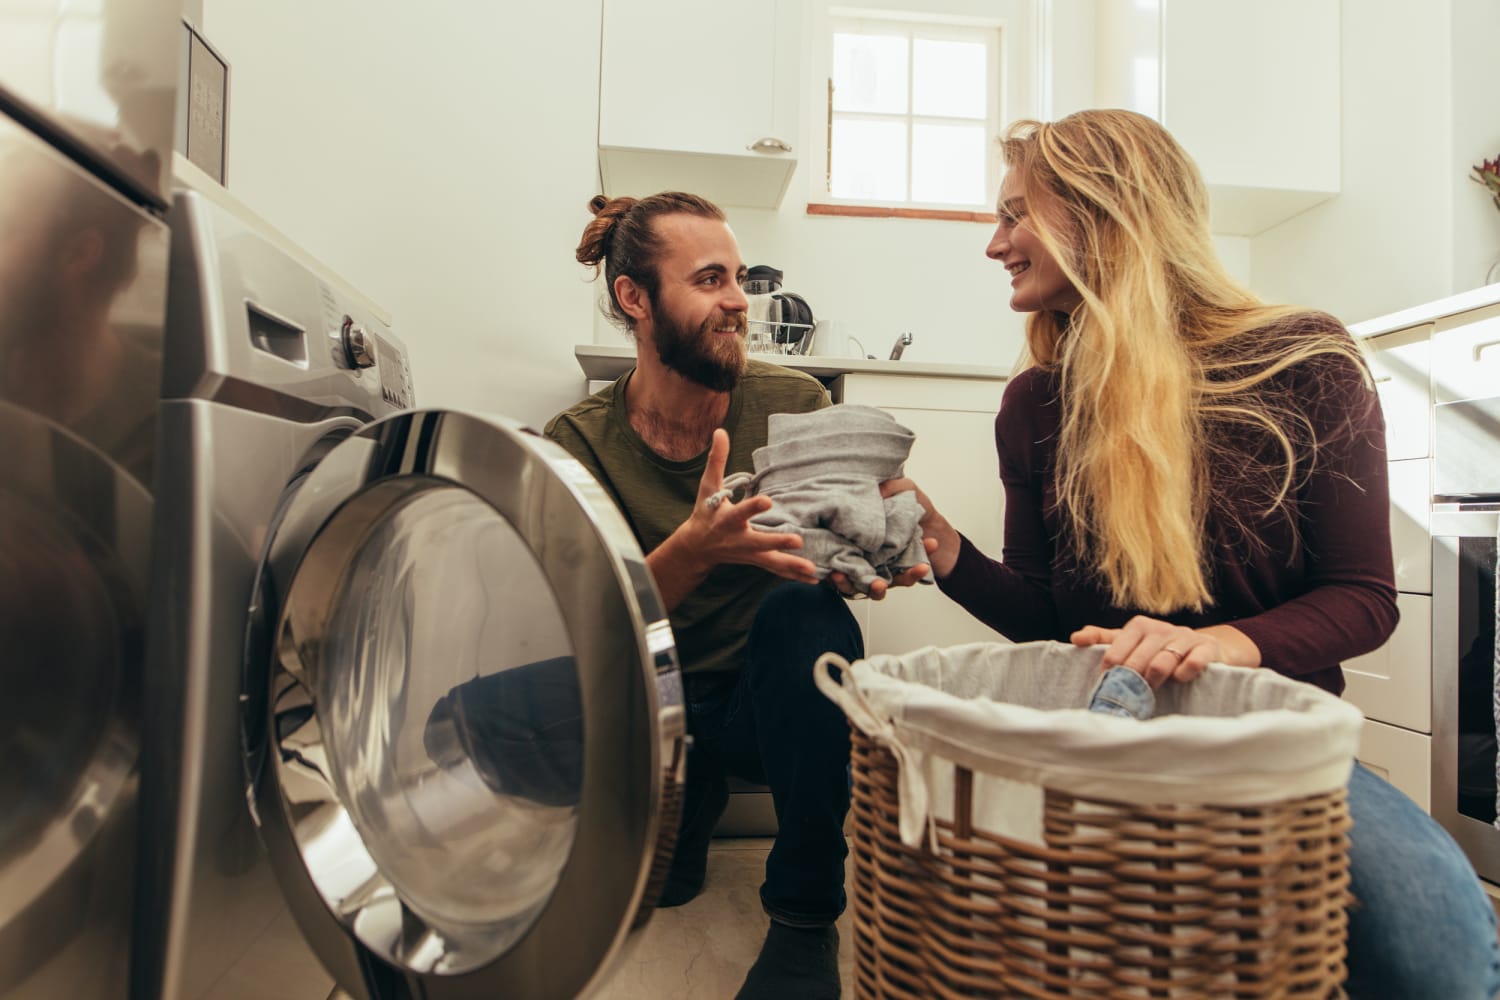 Laundry Disasters: 7 Ways People Ruin Clean Towels (and How to Stop!)